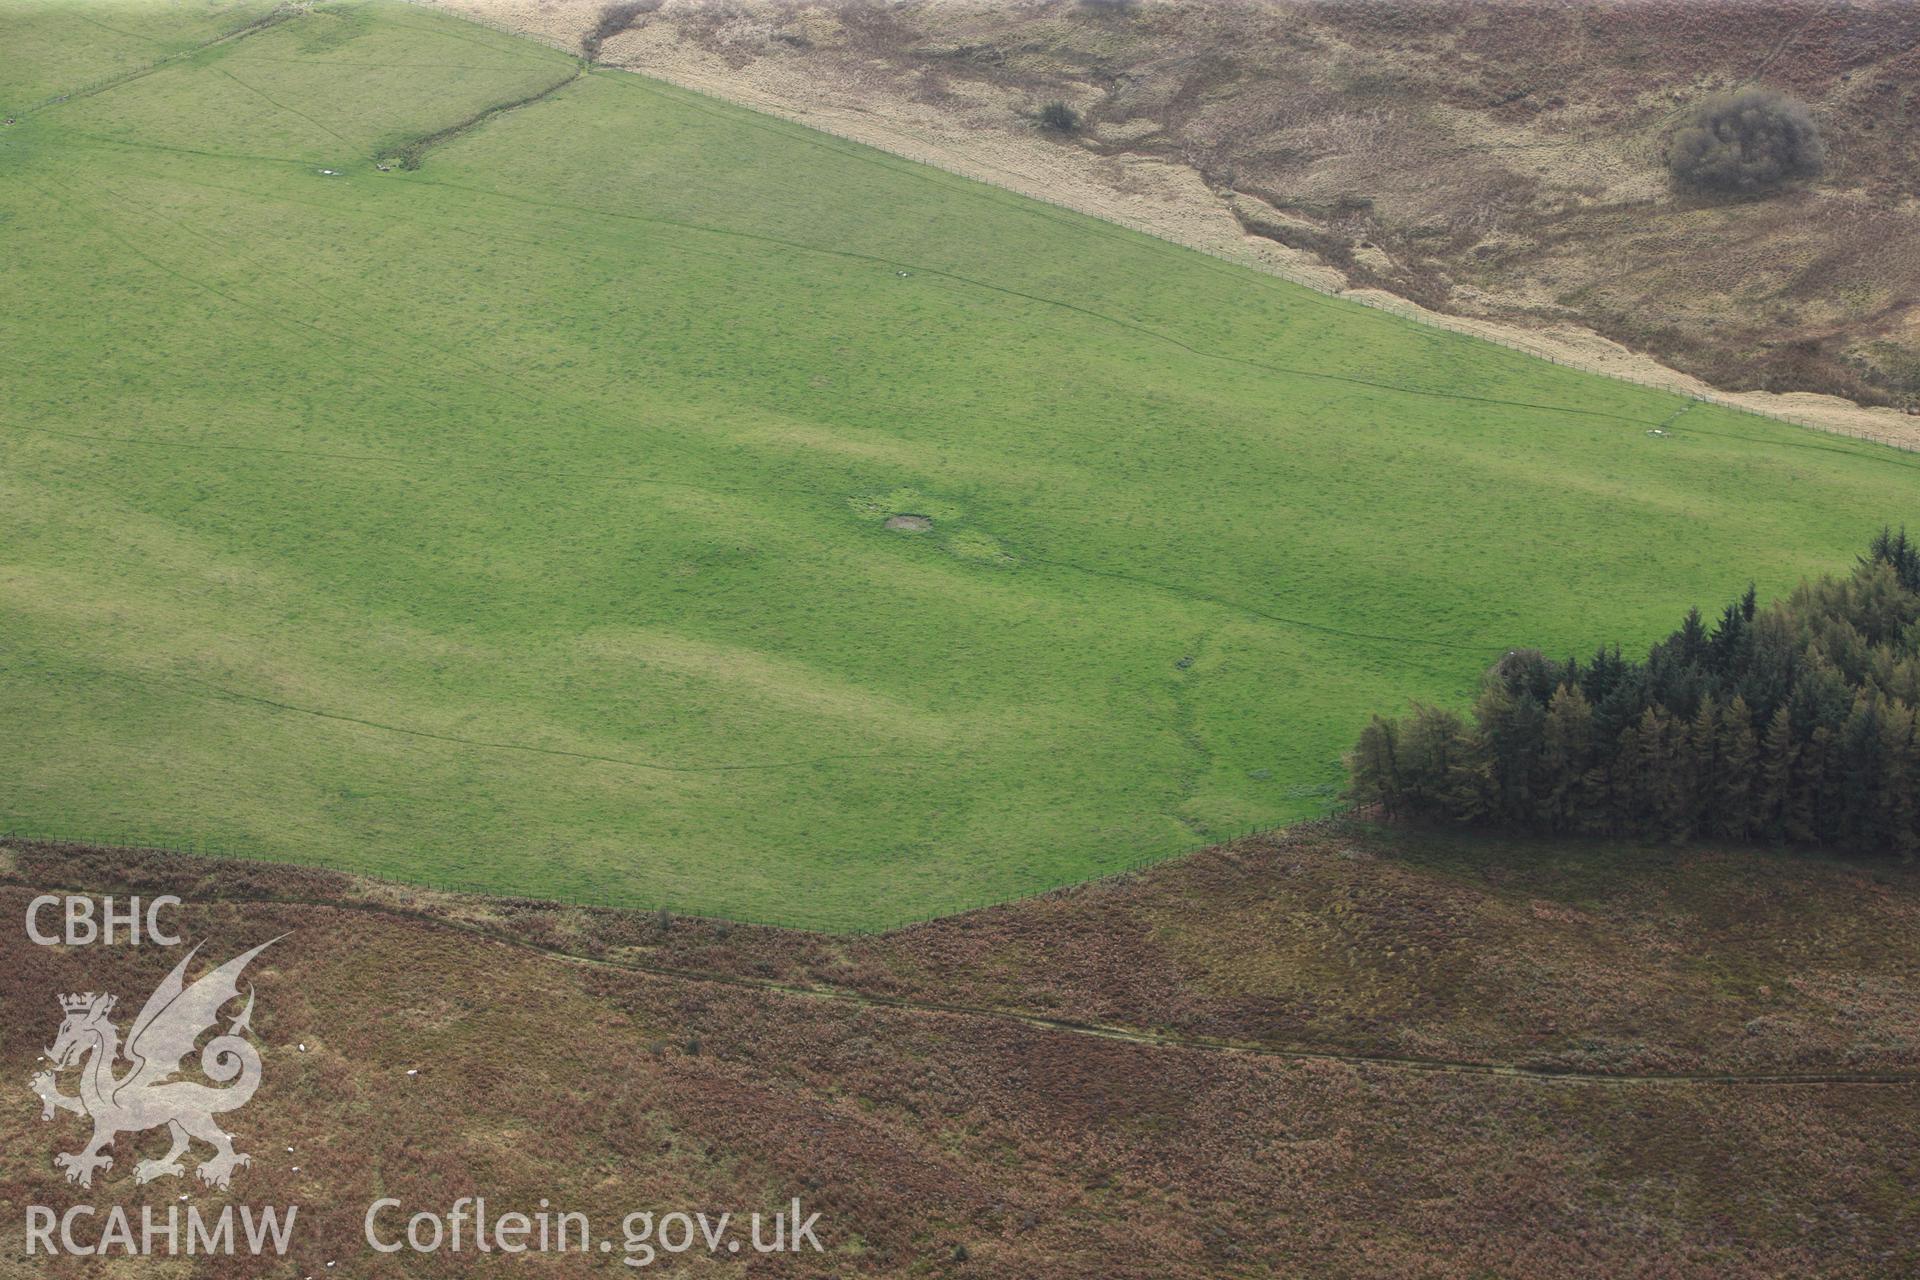 RCAHMW colour oblique photograph of Blaen Nant Barrow. Taken by Toby Driver on 04/10/2011.